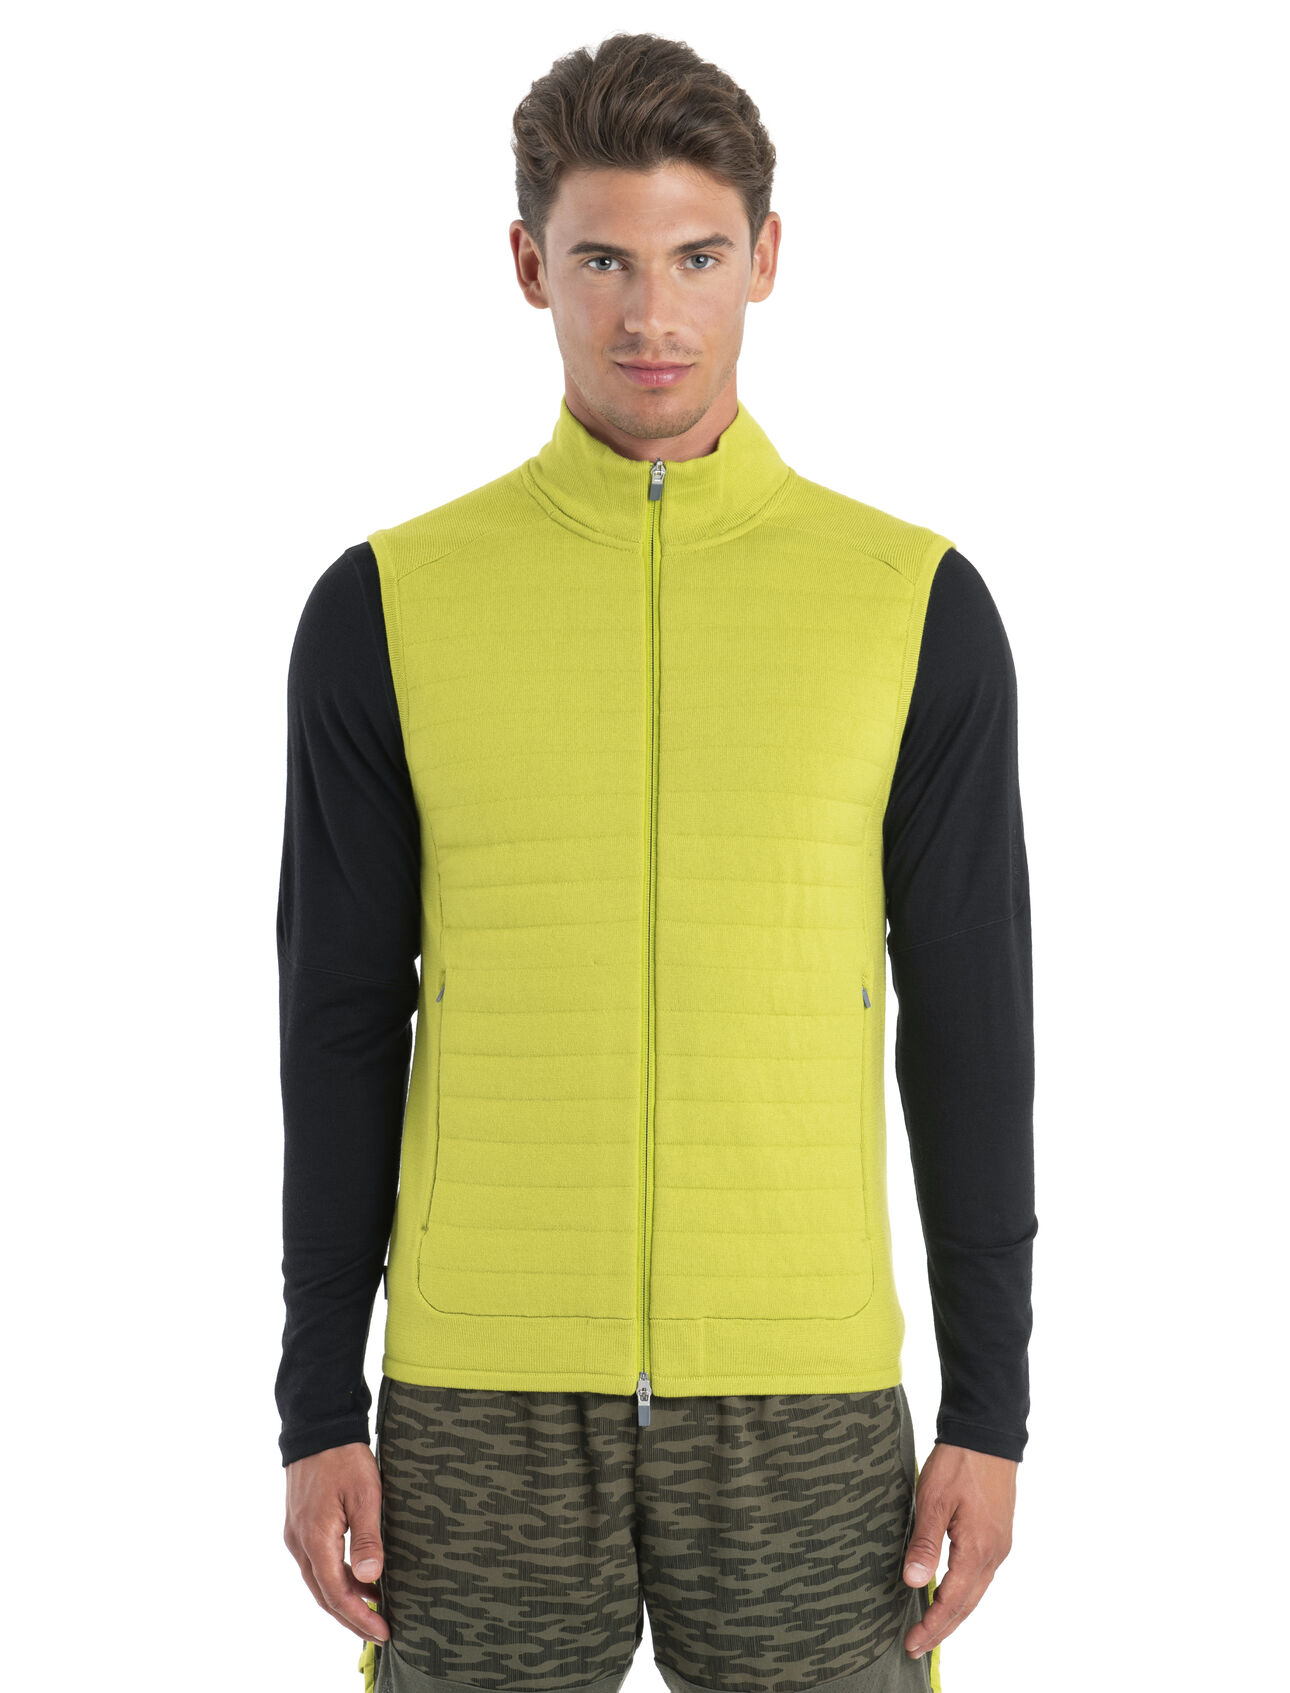 Mens ZoneKnit™ Merino Insulated Vest A body-mapped performance vest that’s ideal for high-output mountain adventures, the ZoneKnit™ Insulated Vest features 100% merino wool for all-natural warmth and temperature regulation.